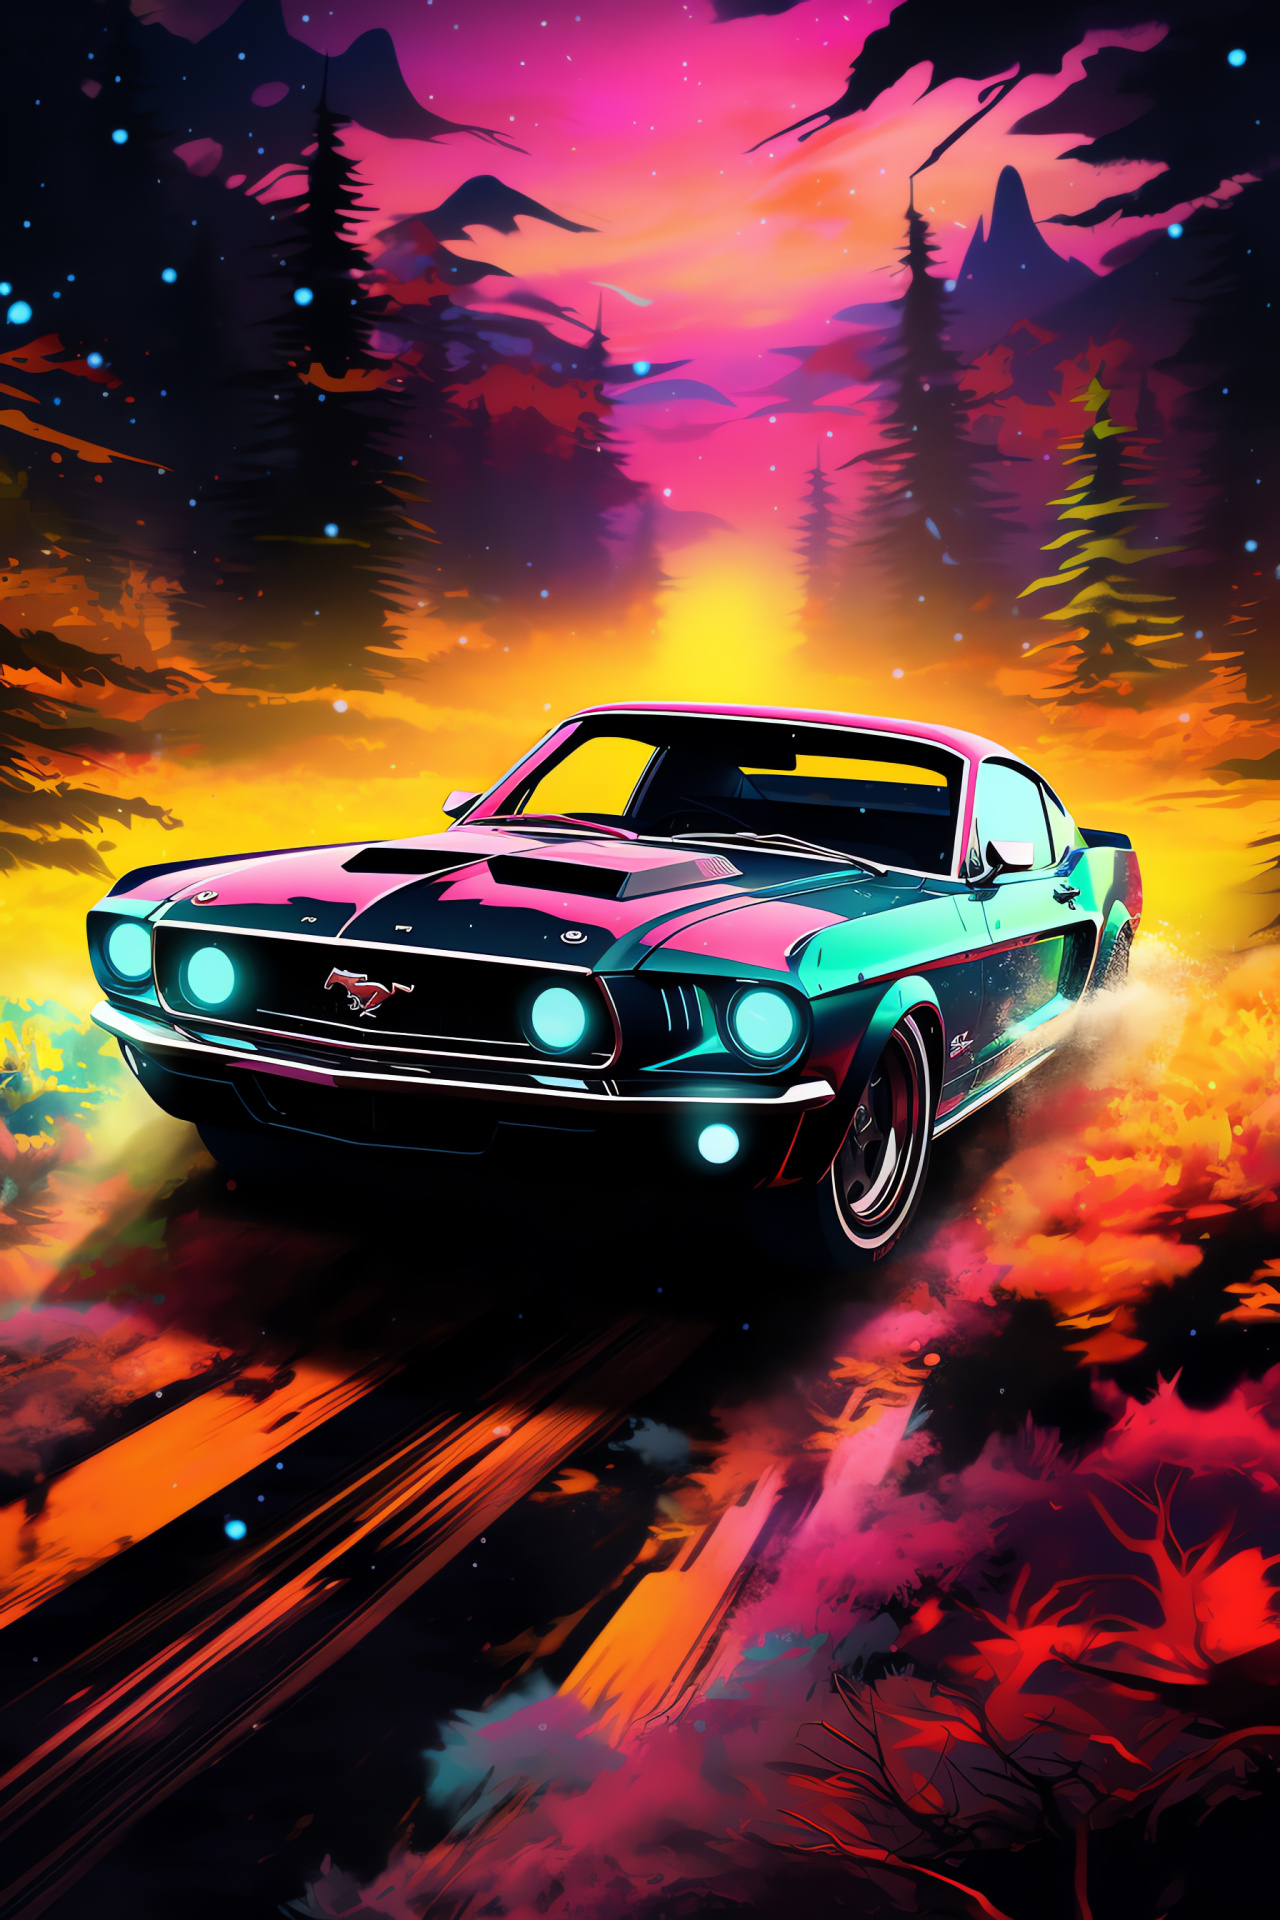 Mustang details, Psychedelic visuals, Creative auto art, Automotive close-up, Cyberdelic theme, HD Phone Wallpaper